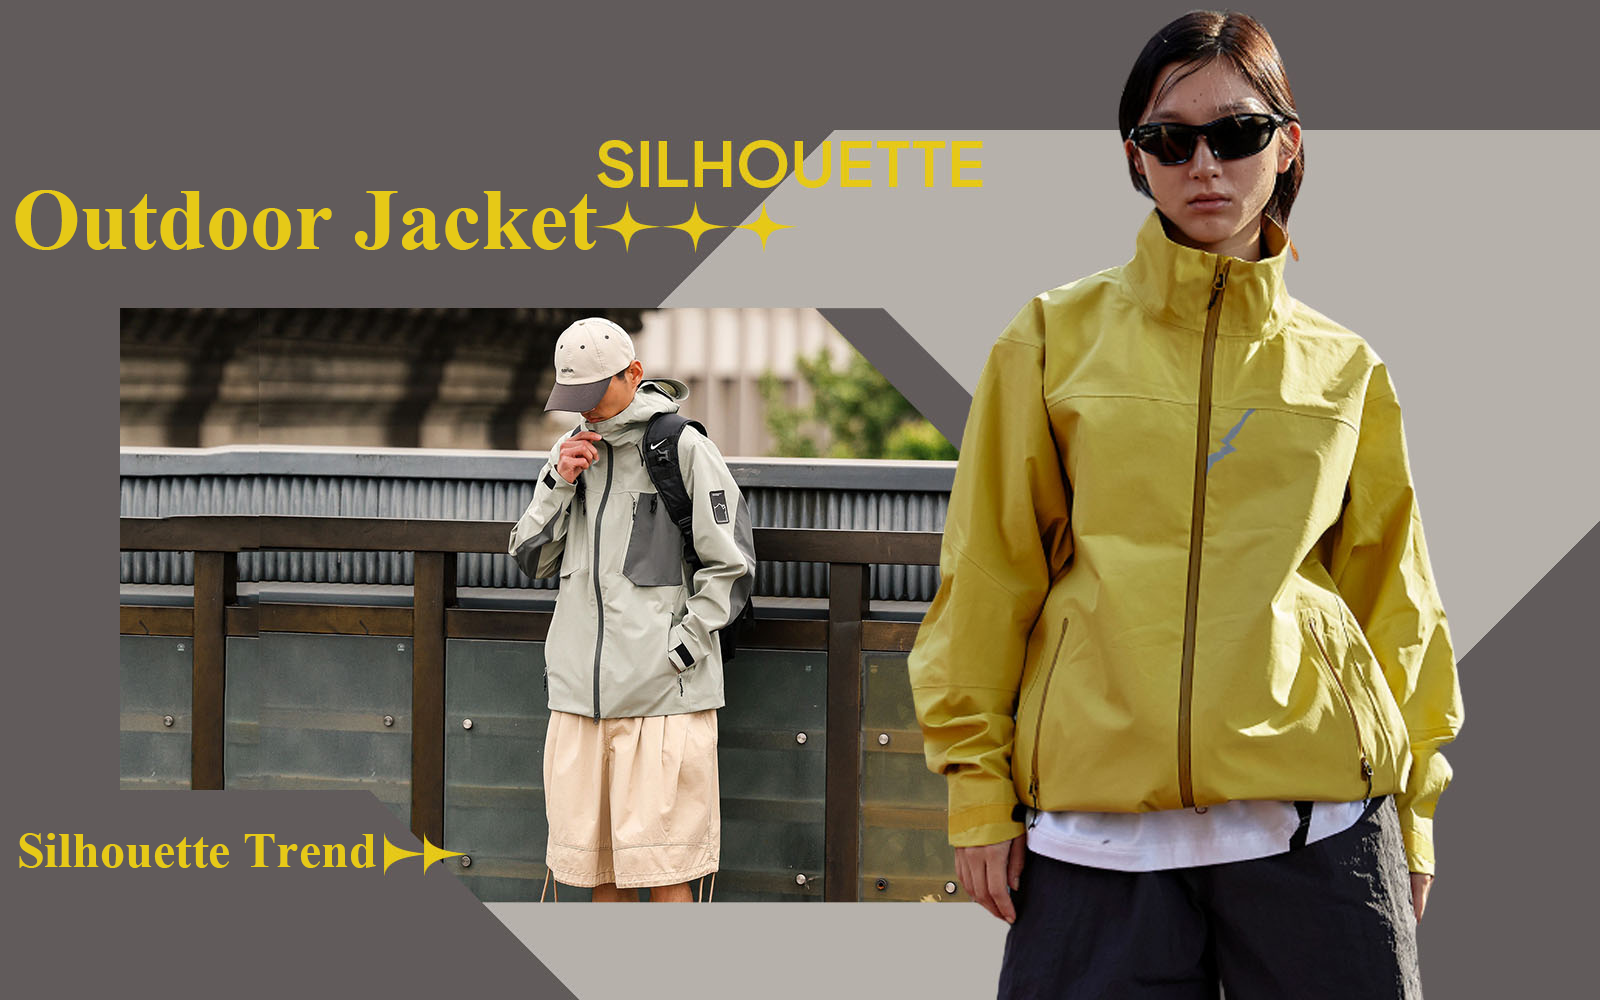 Urban Exploration -- The Silhouette Trend for Outdoor Jacket